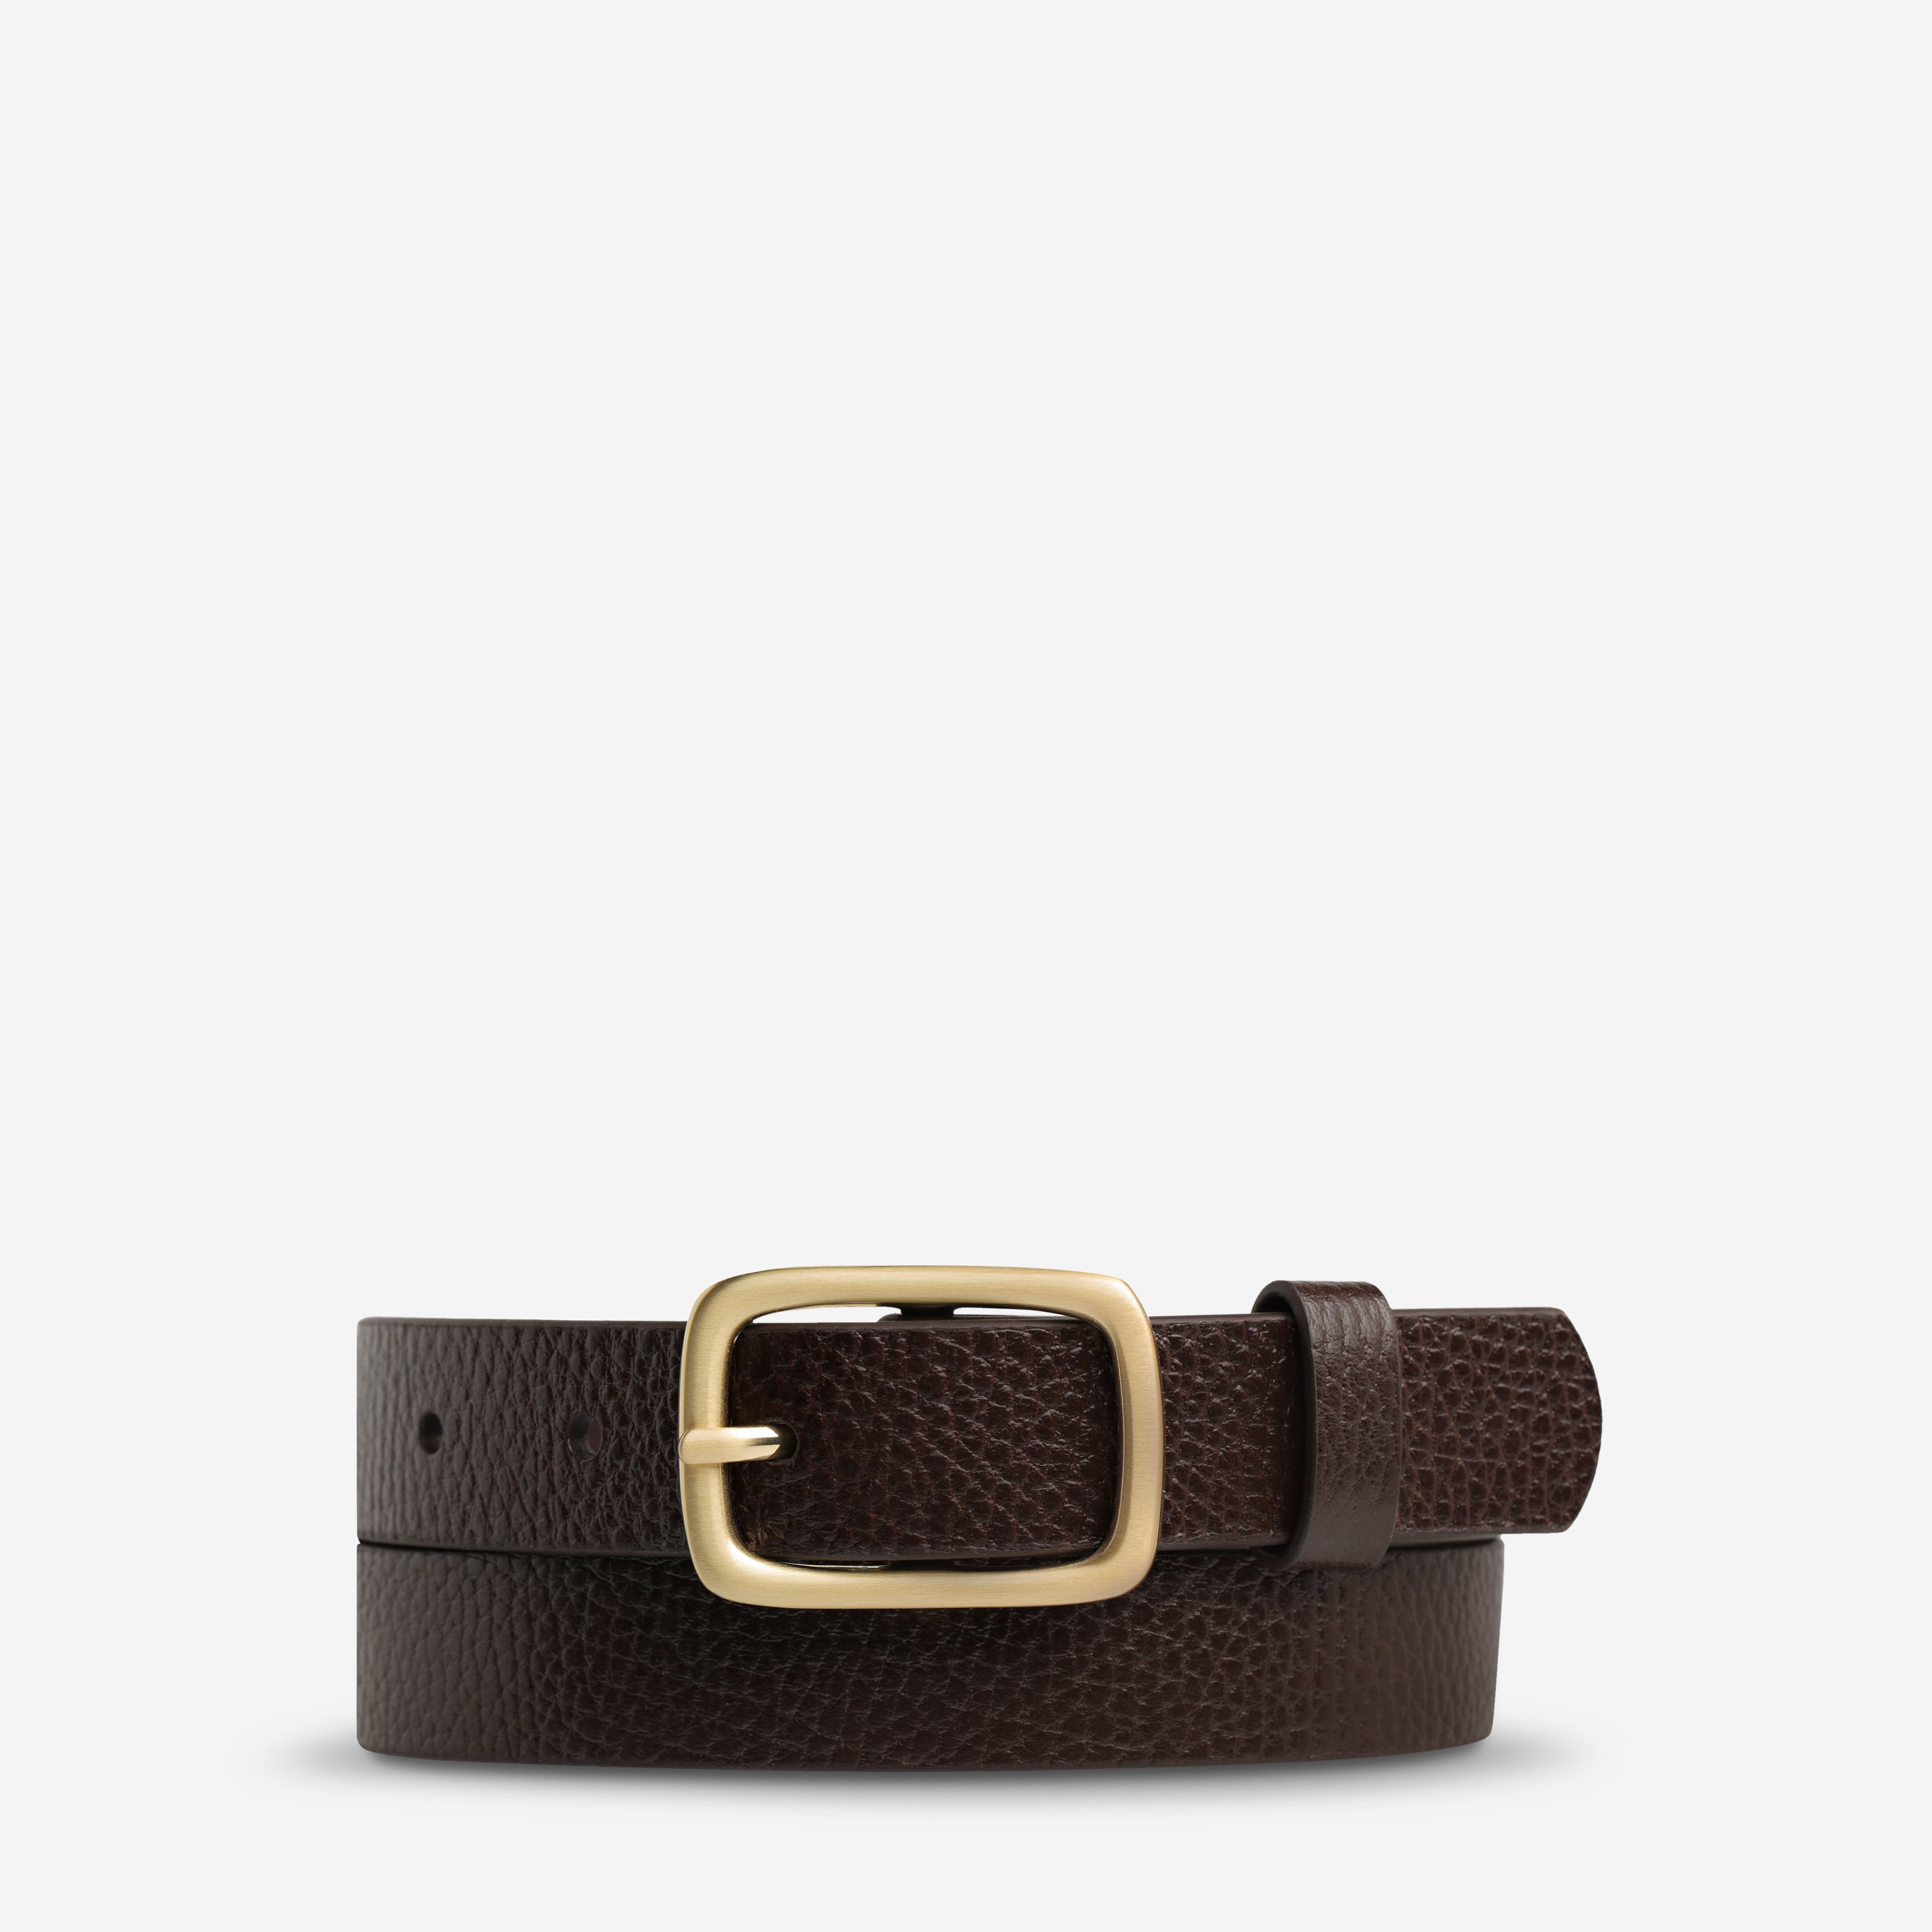 Status Anxiety Nobody's Fault Women's Leather Belt Choc/Gold